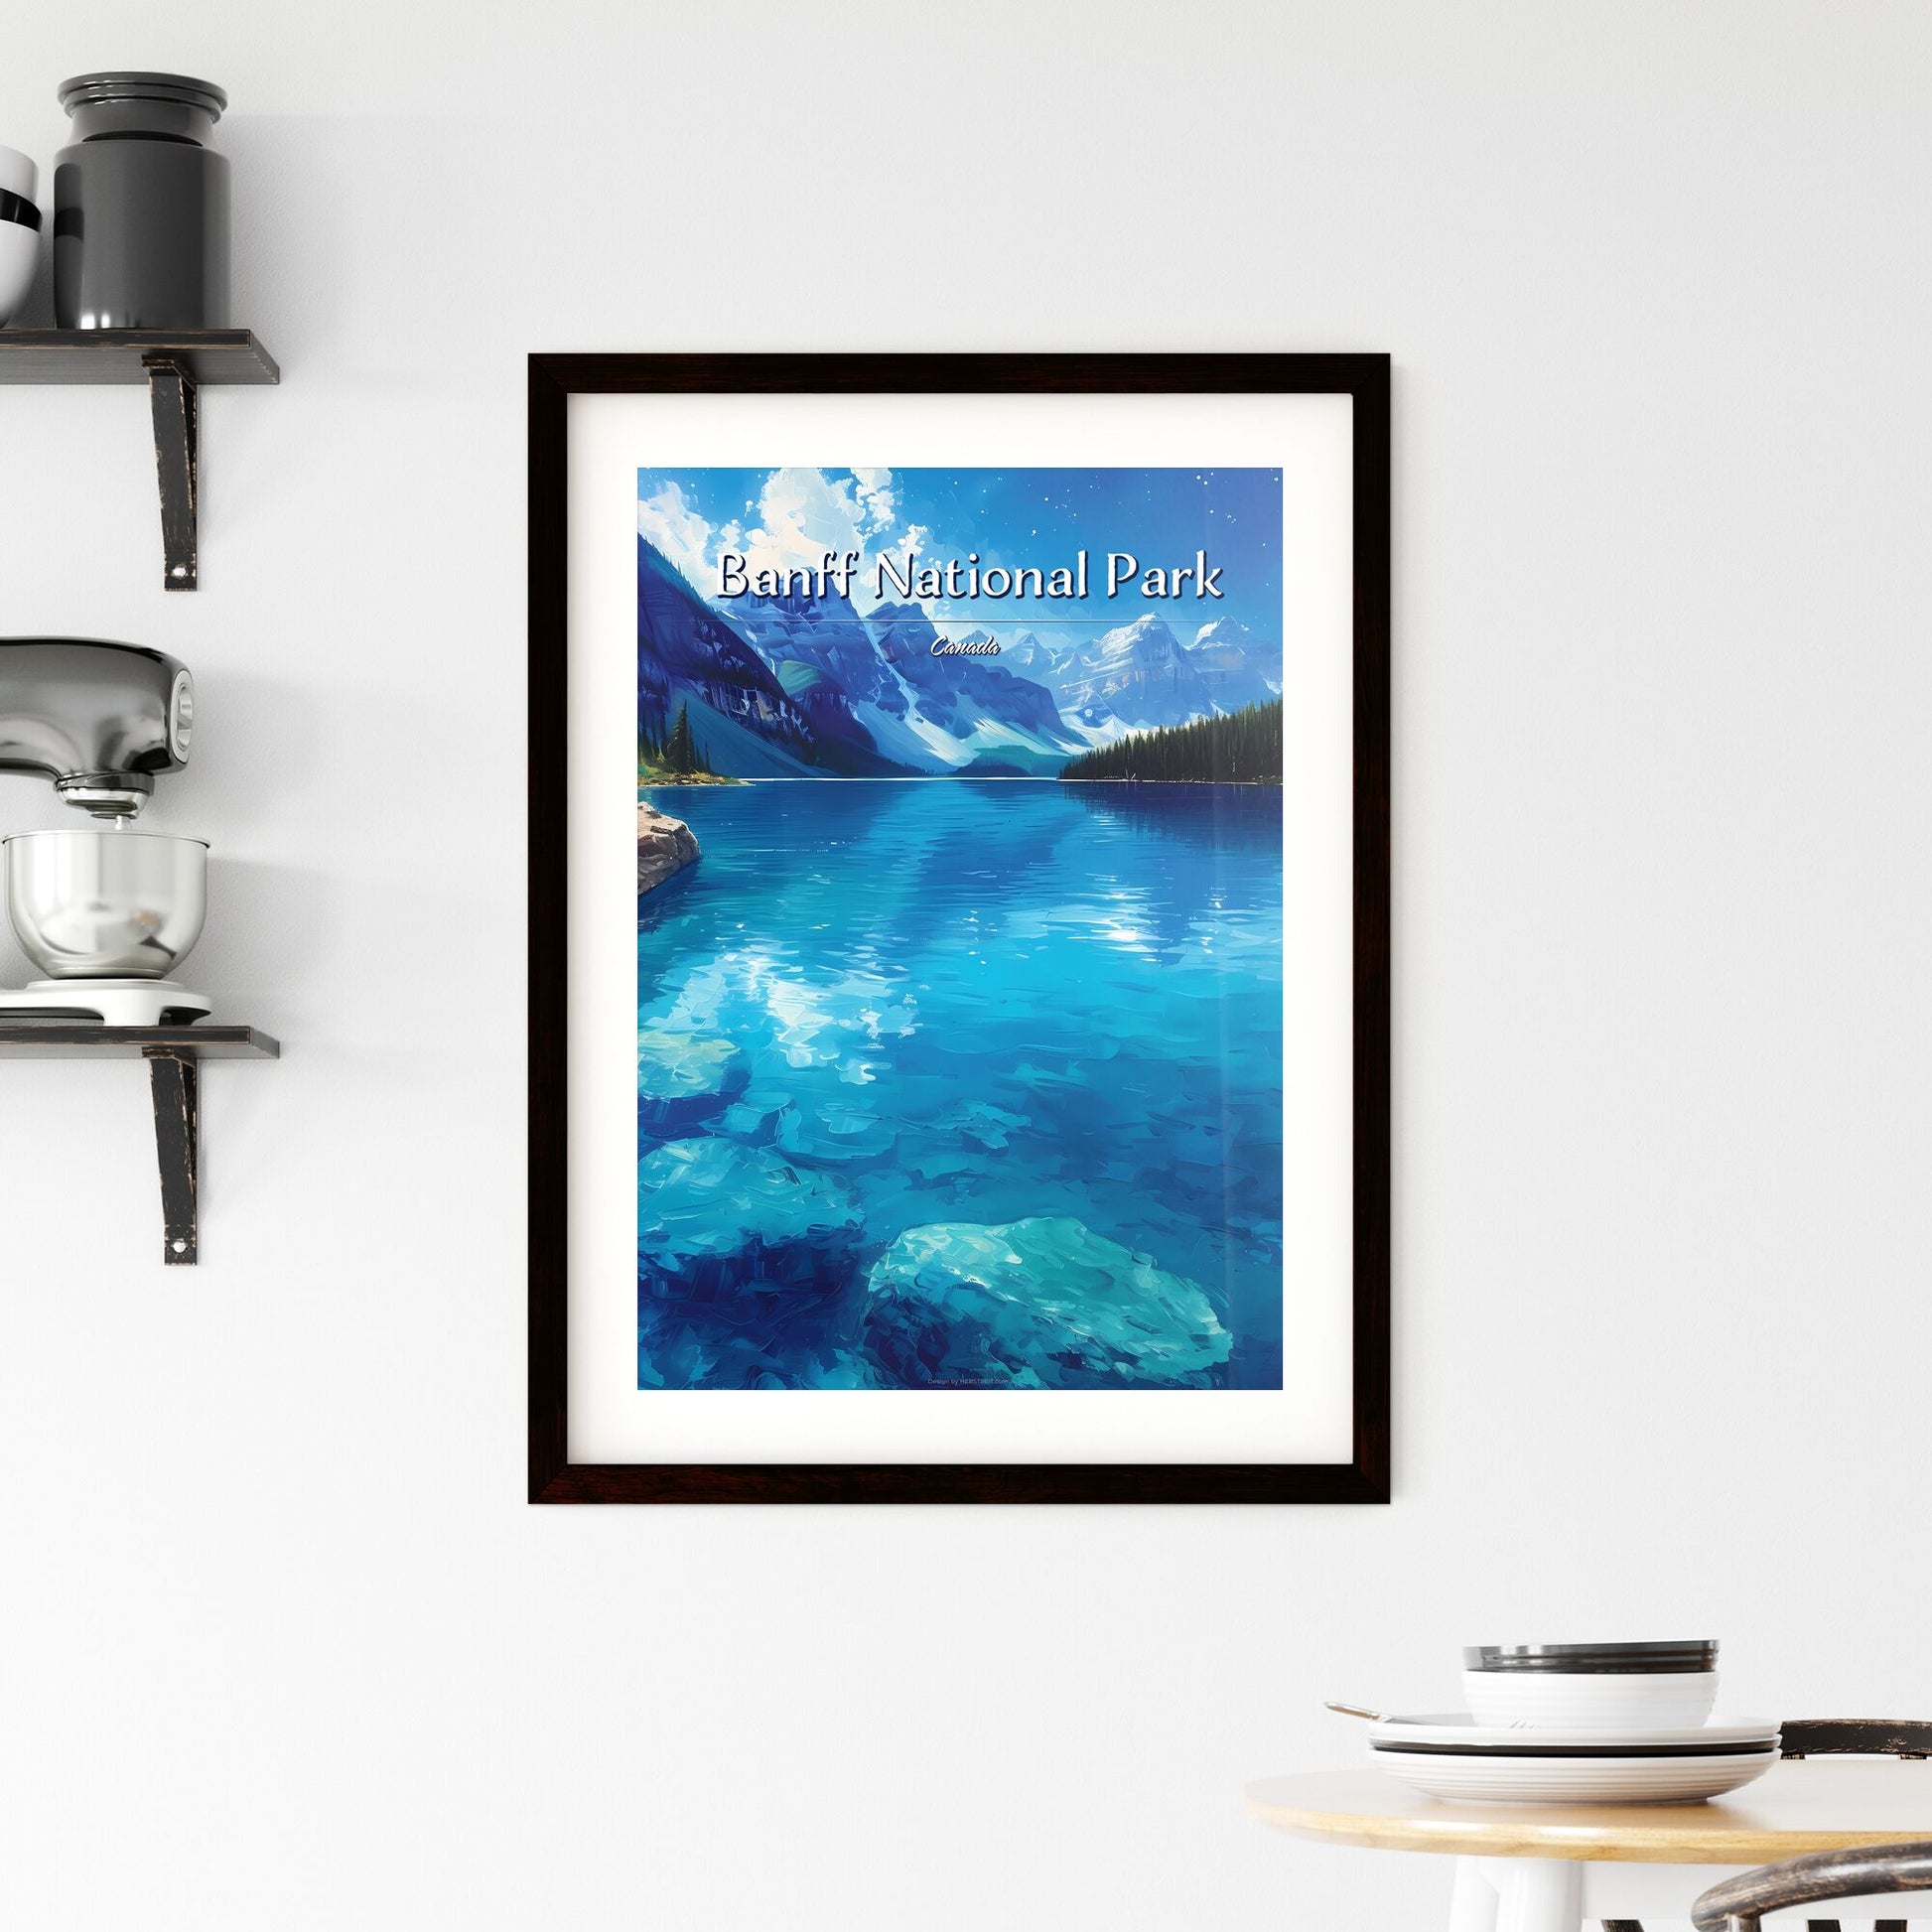 Banff National Park, Canada - Art print of a blue lake with trees and mountains in the background Default Title